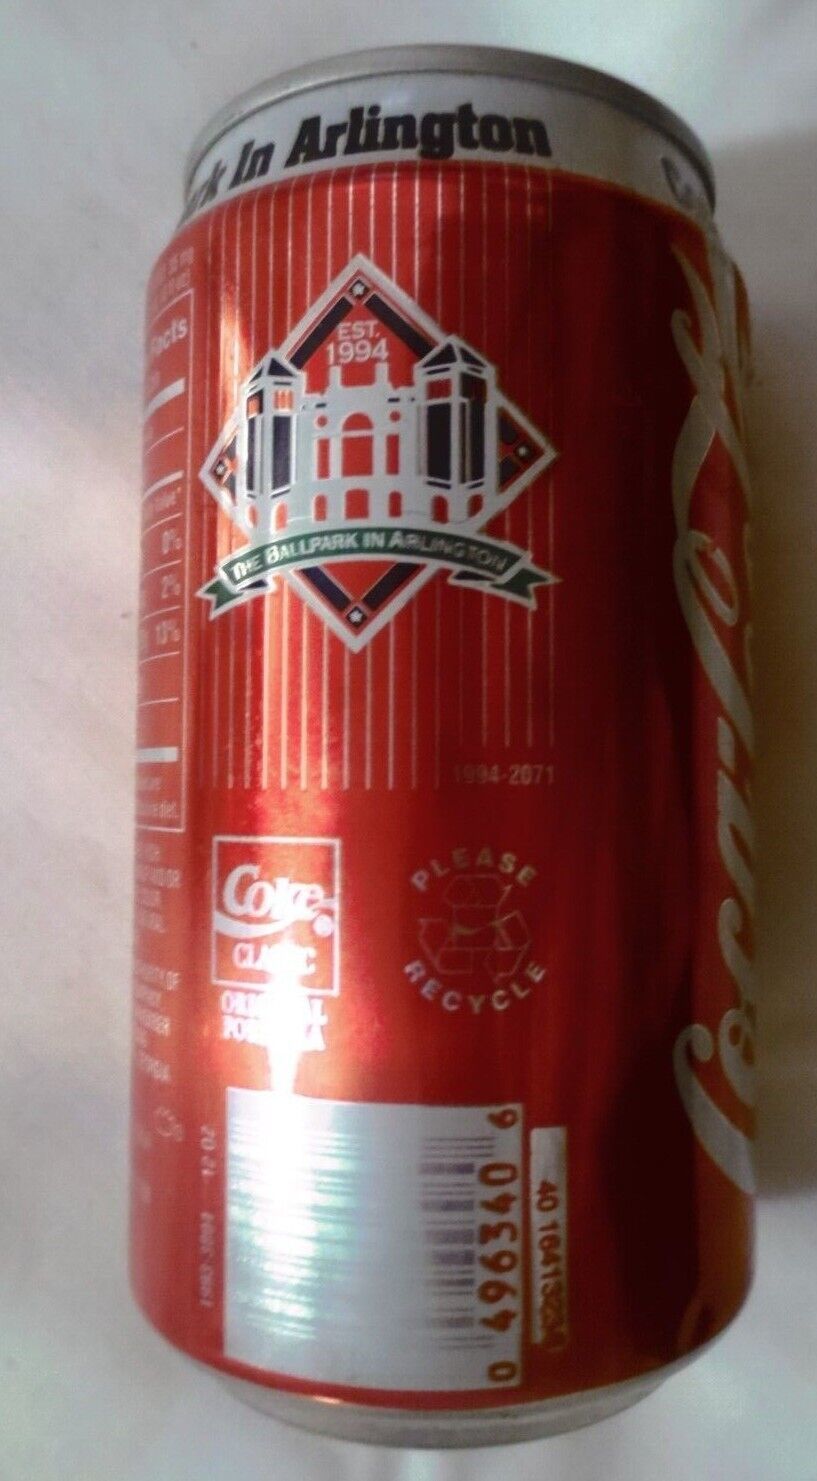 Primary image for Coca Cola Commemorates Opening the Ballpark in Arlington '94 Can unopened empty